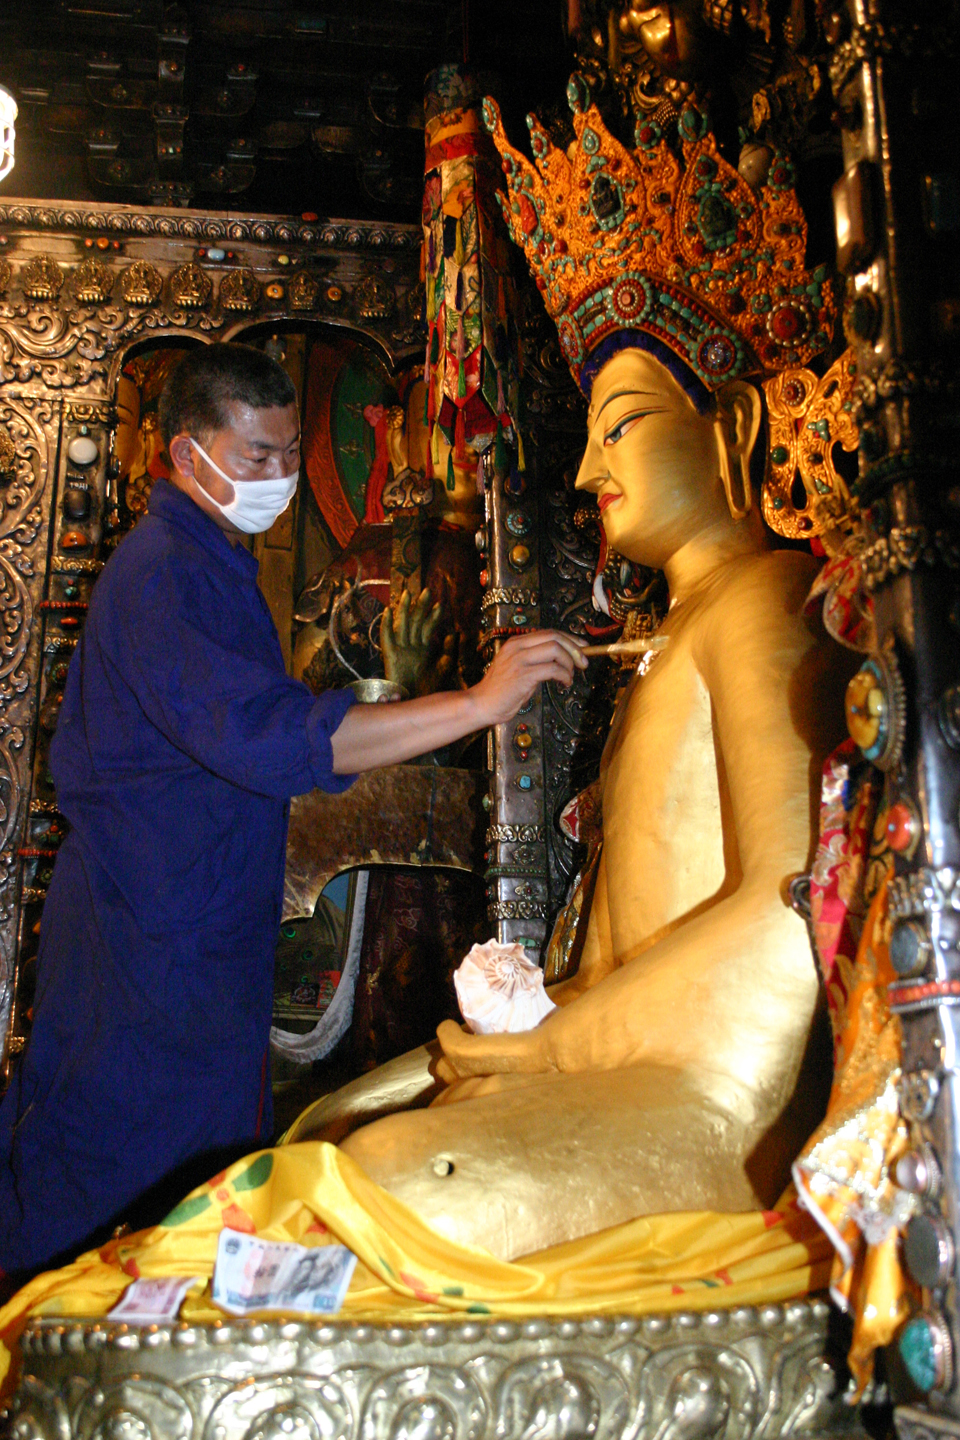 Man dressed in blue work clothes and face mask applies paint to golden statue of Buddha